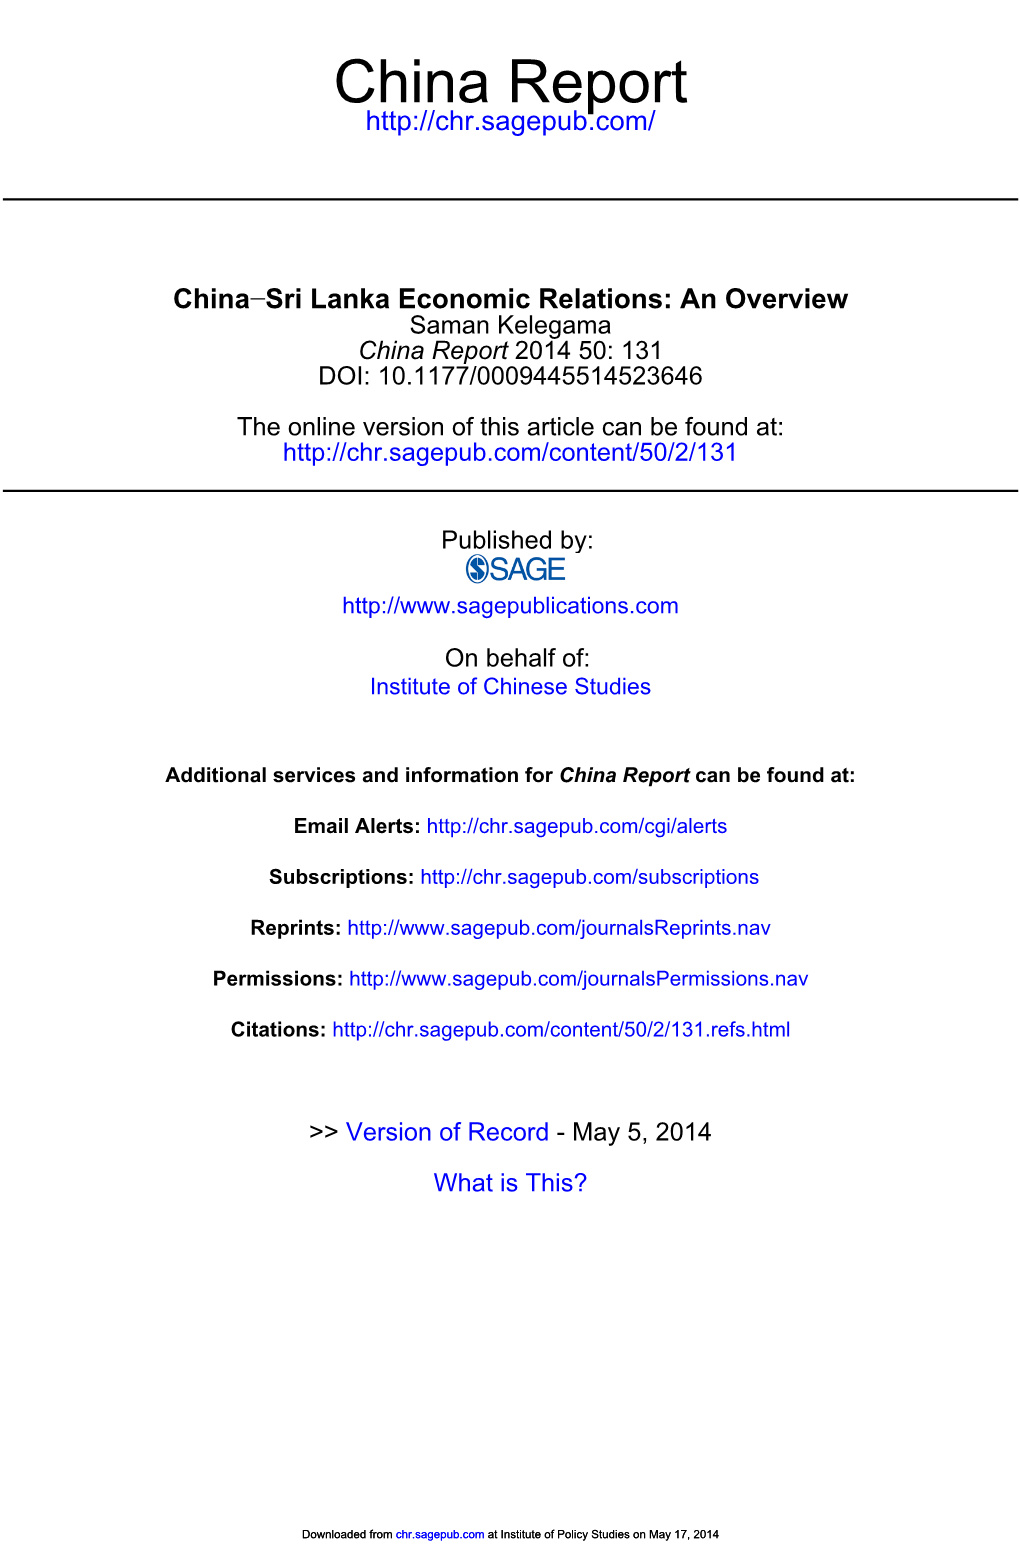 China-Sri Lanka Economic Relationship to Be One-Sided with All the Benefits Flowing to Sri Lanka from China